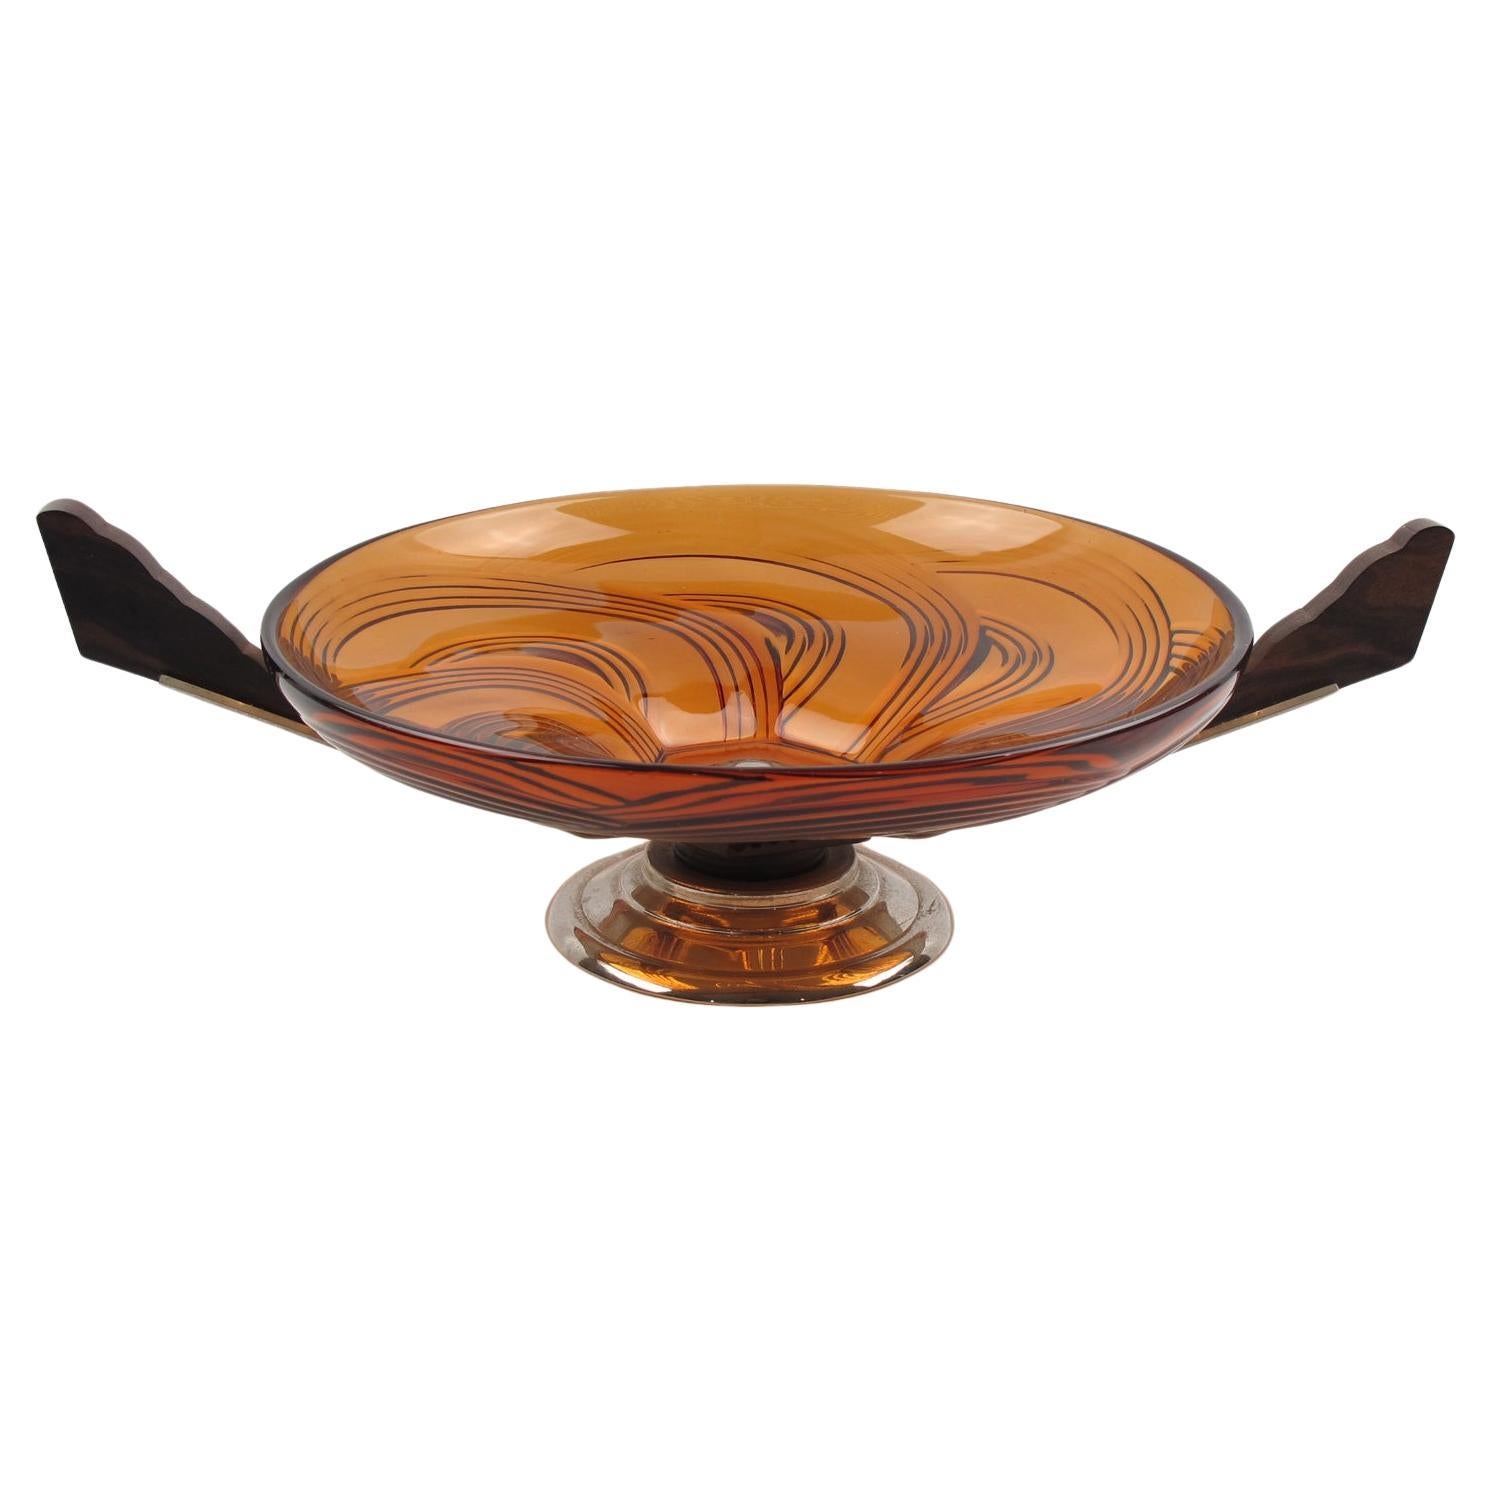 Art Deco Macassar Wood and Glass Centerpiece Bowl, 1930s For Sale